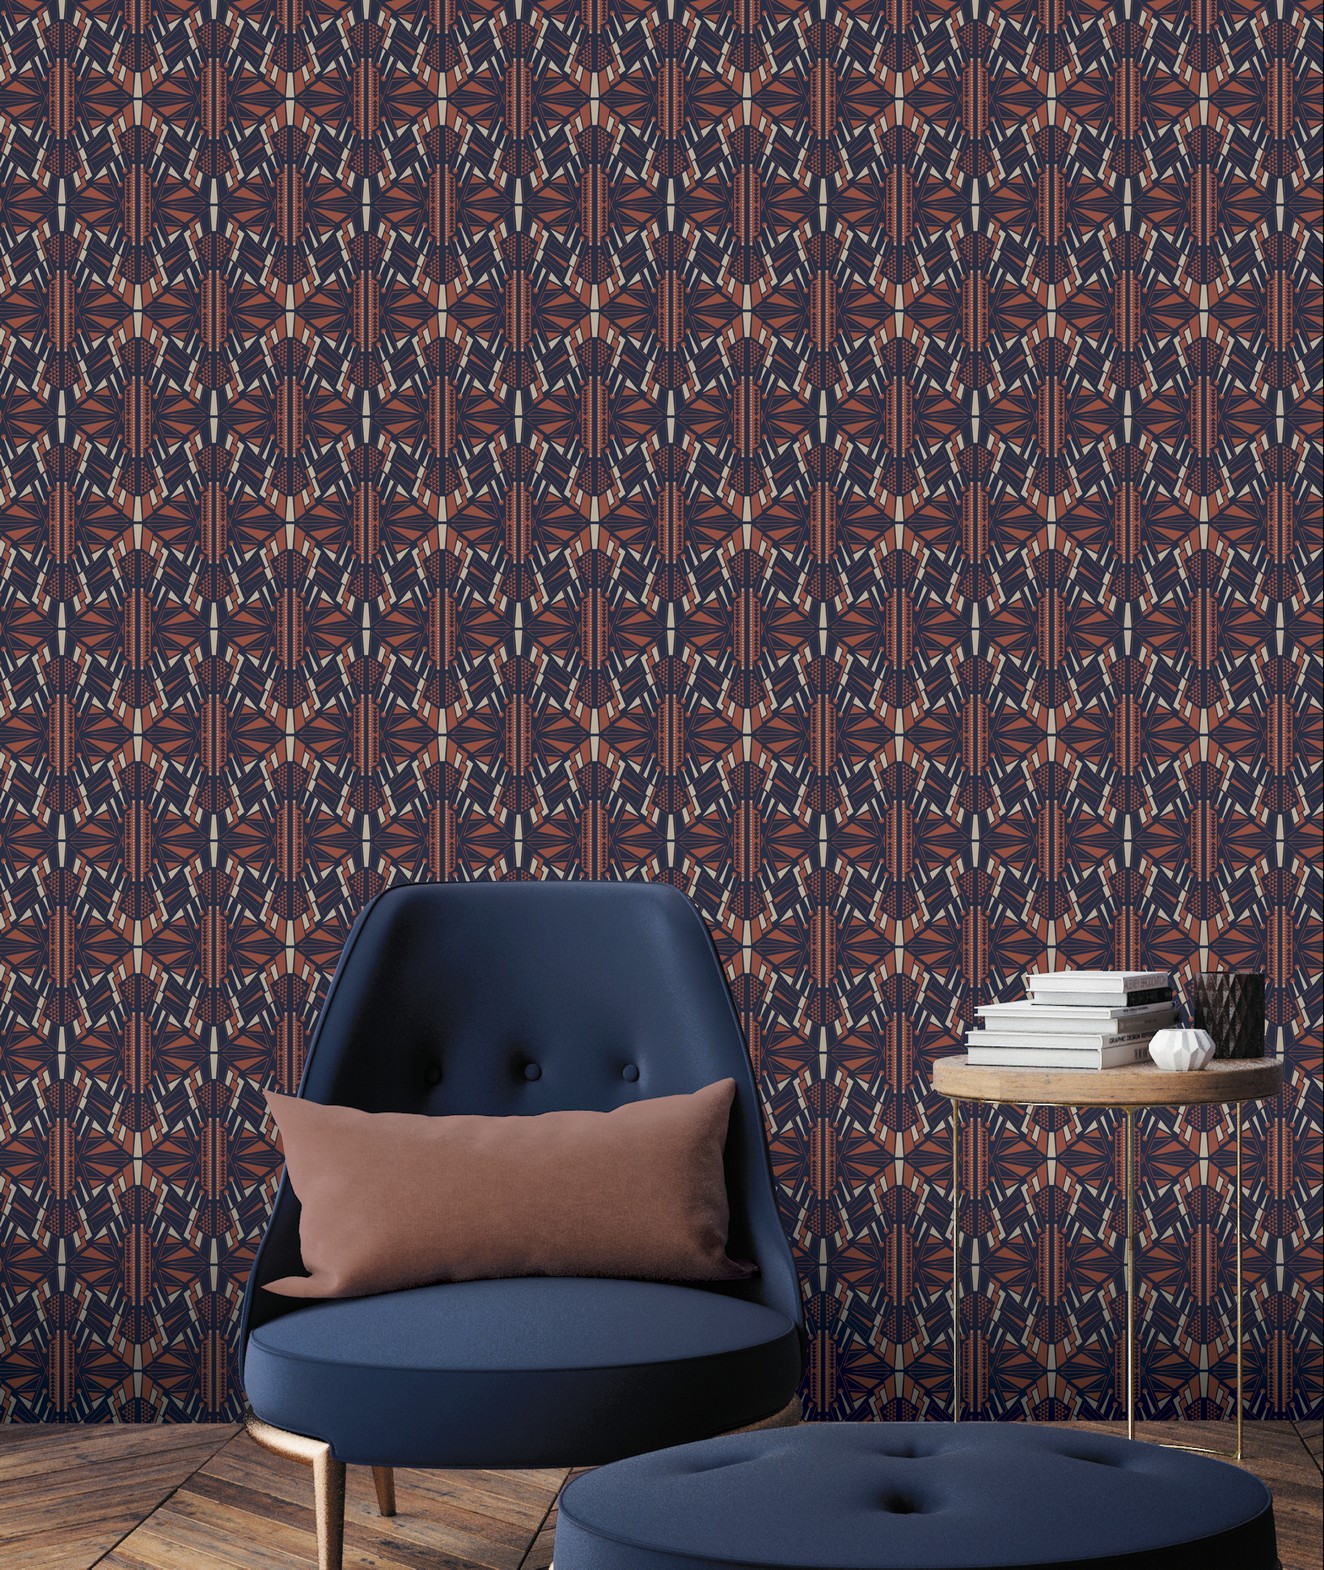 Empire State Patterned Wallpaper Design